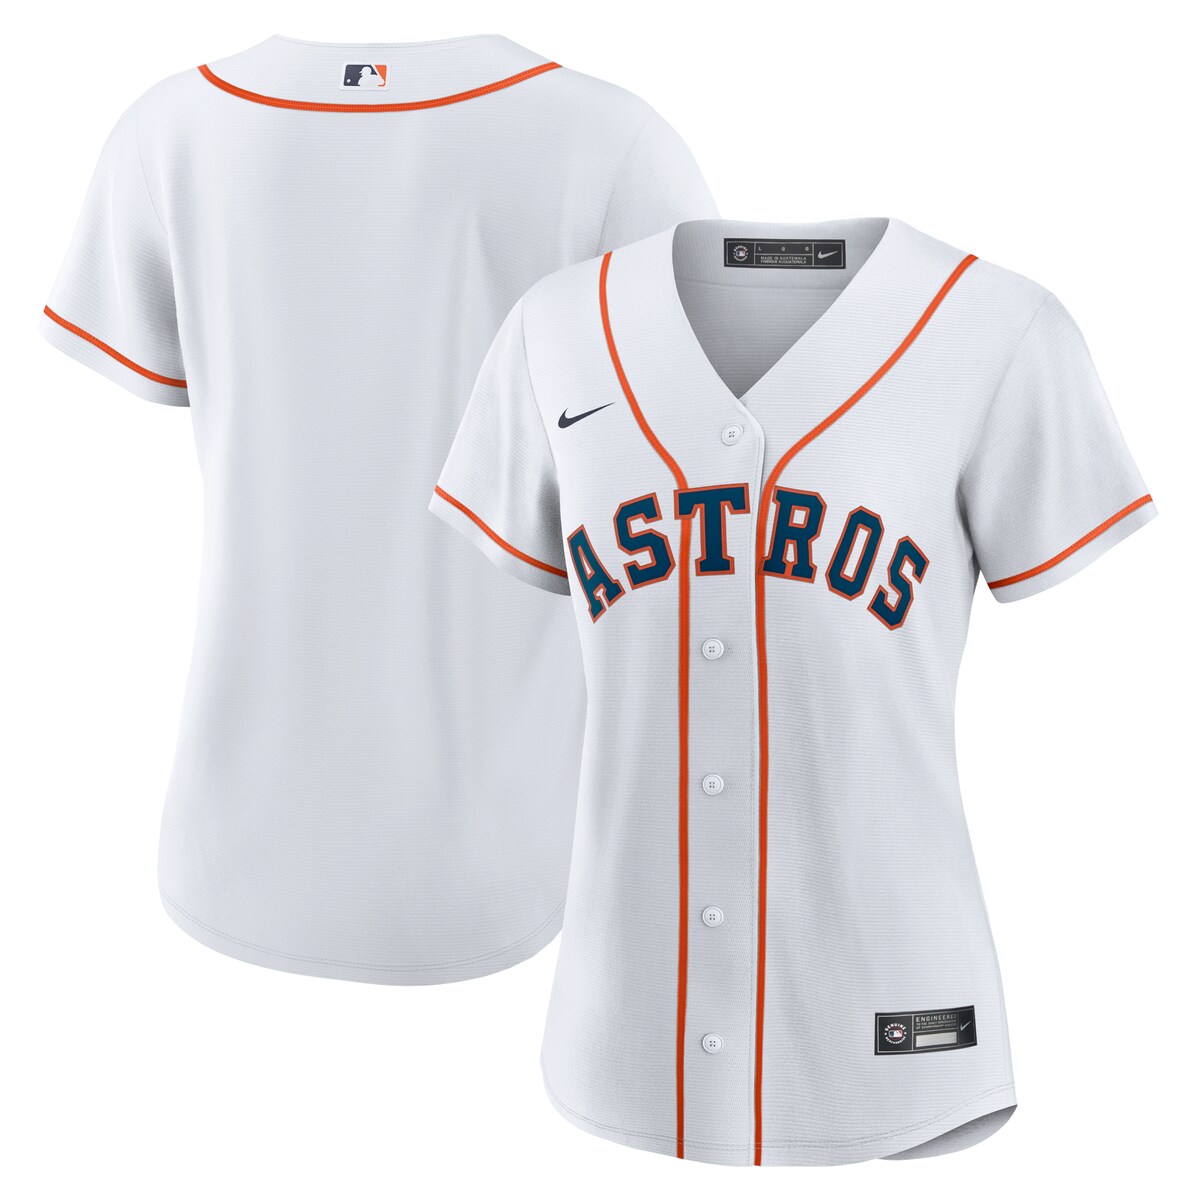 As the ultimate Houston Astros fan, you deserve the same look that your favorite players sport out on the field. This Replica Team jersey from Nike brings the team's official design to your wardrobe for a consistently spirited look on game day. The polyester material and slick Houston Astros graphics are just what any fan needs to look and feel their best.Officially licensedBrand: NikeMachine wash gentle or dry clean. Tumble dry low, hang dry preferred.Jersey Color Style: HomeHeat-sealed jock tagHeat-sealed transfer appliqueMLB Batterman applique on center back neckRounded hemShort sleeveMaterial: 100% PolyesterImportedFull-button frontReplica Jersey